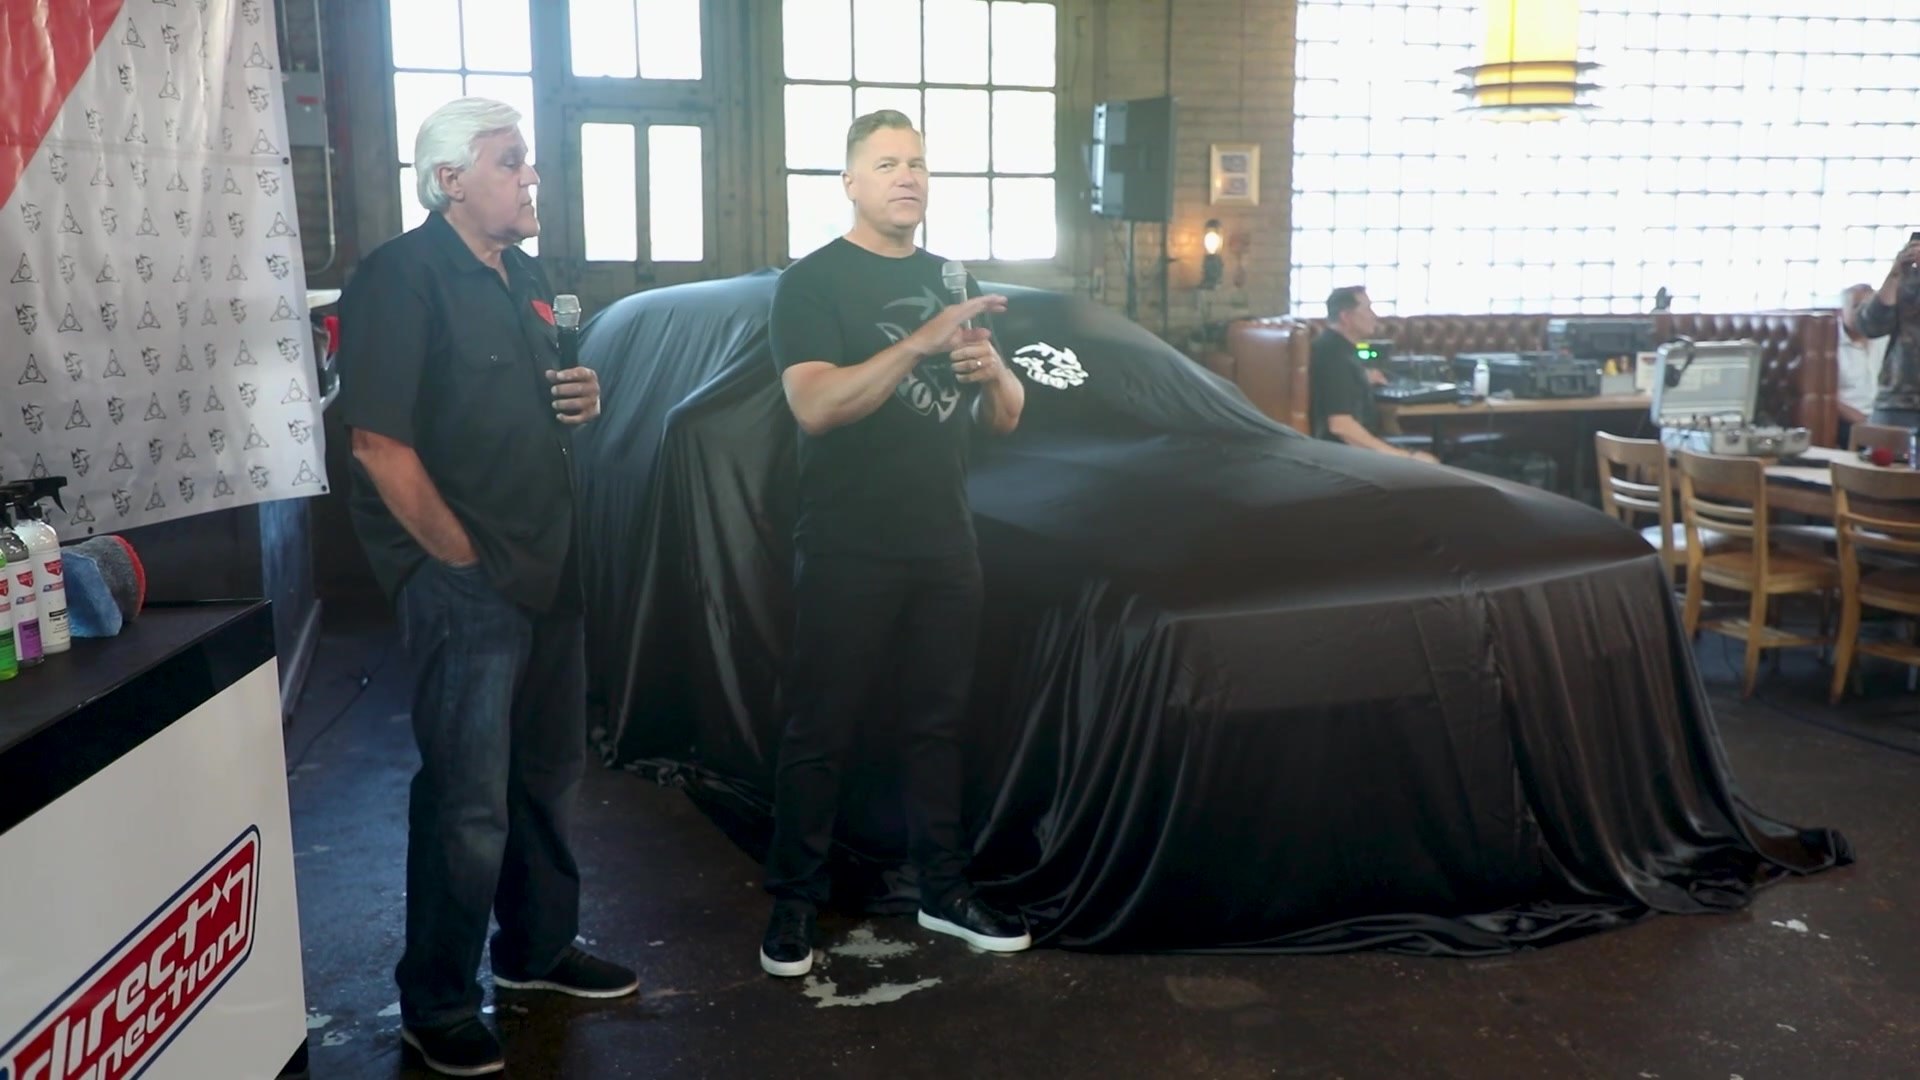 Dodge CEO & Jay Leno Team Up To Launch New Car Care Products